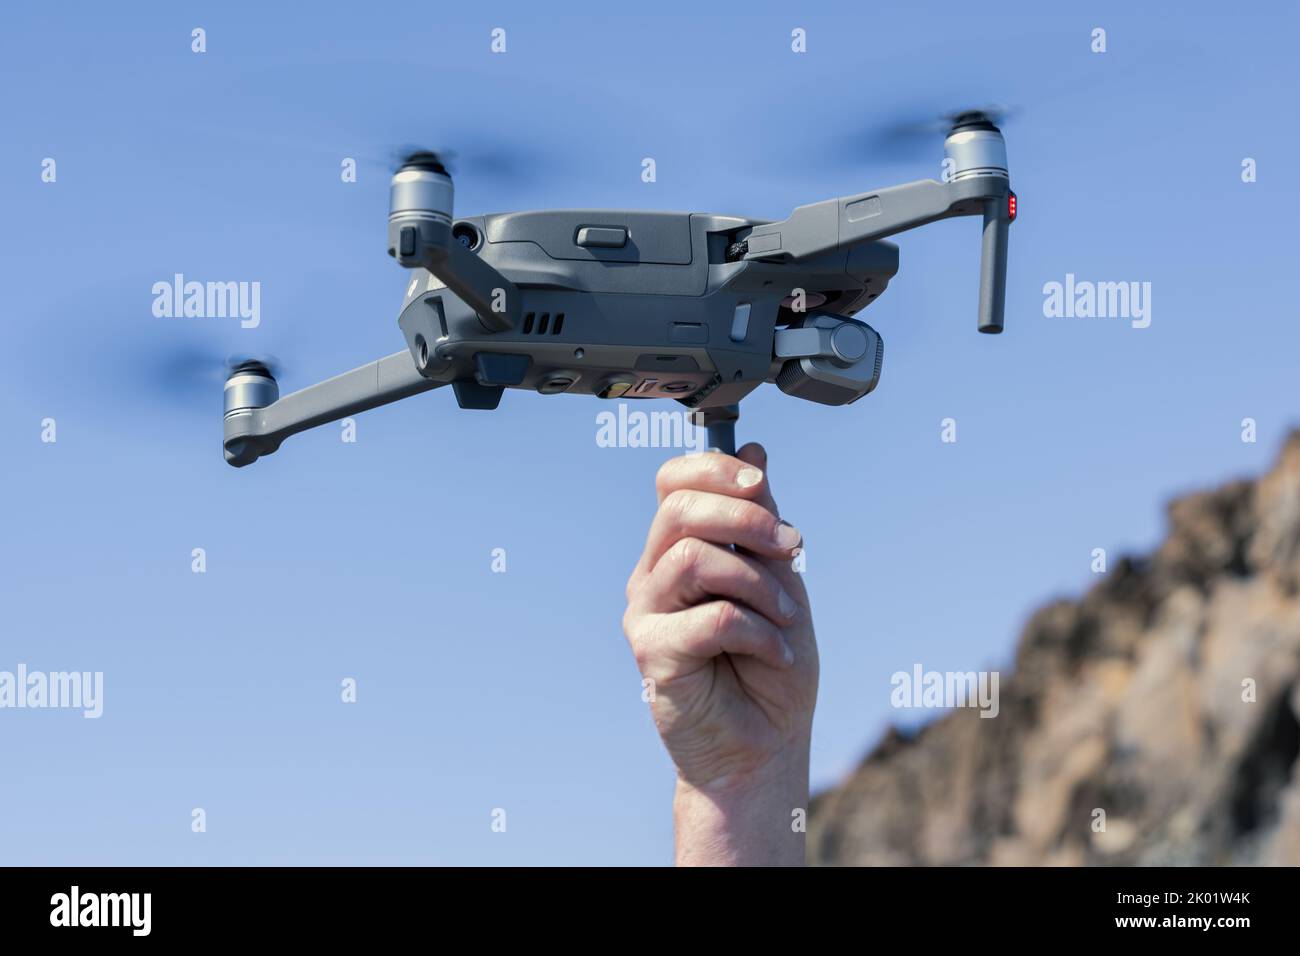 Man Hand launching a drone against blue sky Stock Photo